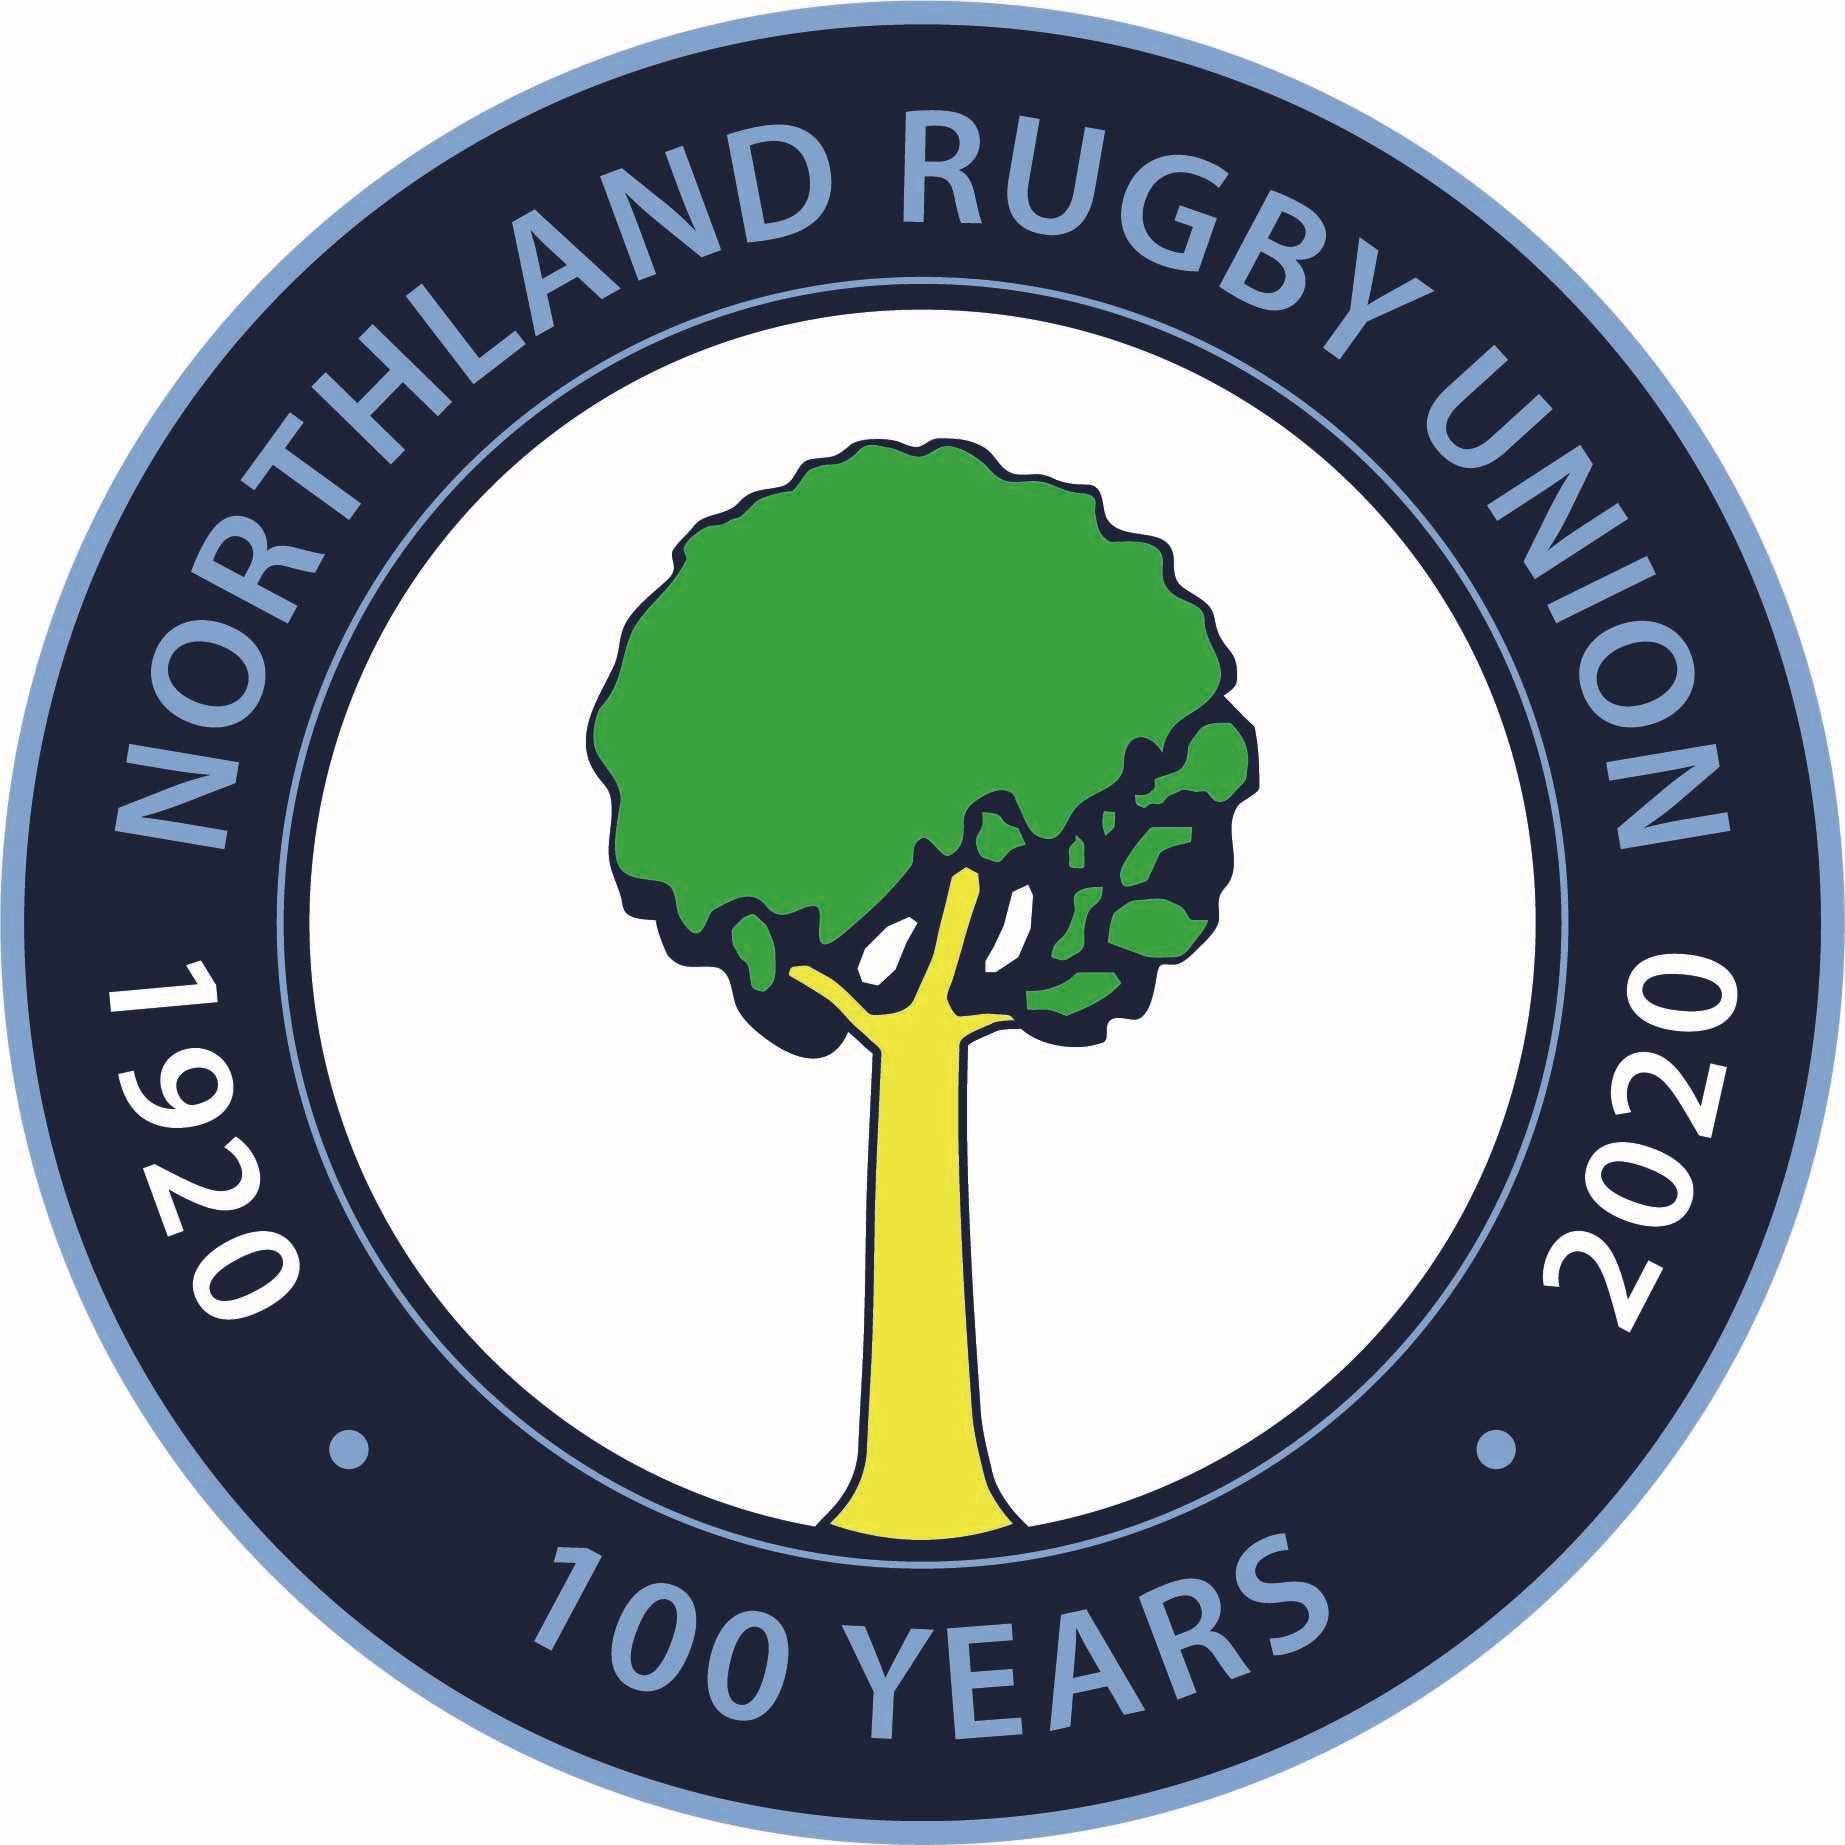 NORTHLAND RUGBY CENTENARY GAMES - MATCH REPORTS BY STEVEN HARRIS